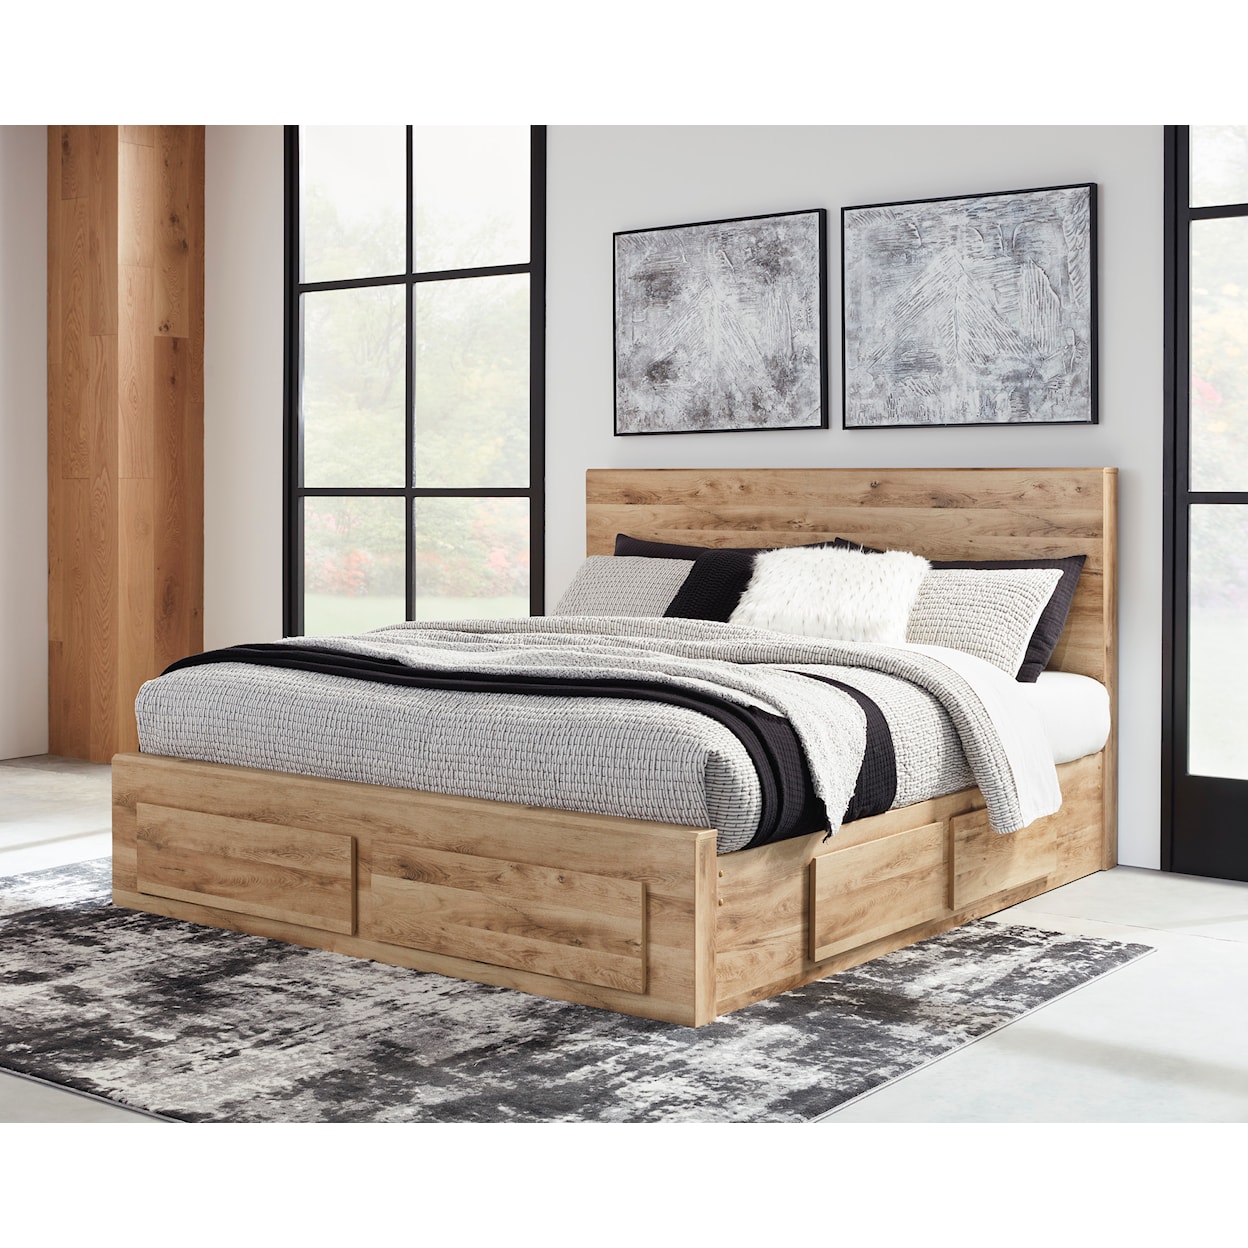 Signature Design by Ashley Hyanna King Storage Bed w/ 6 Drawers